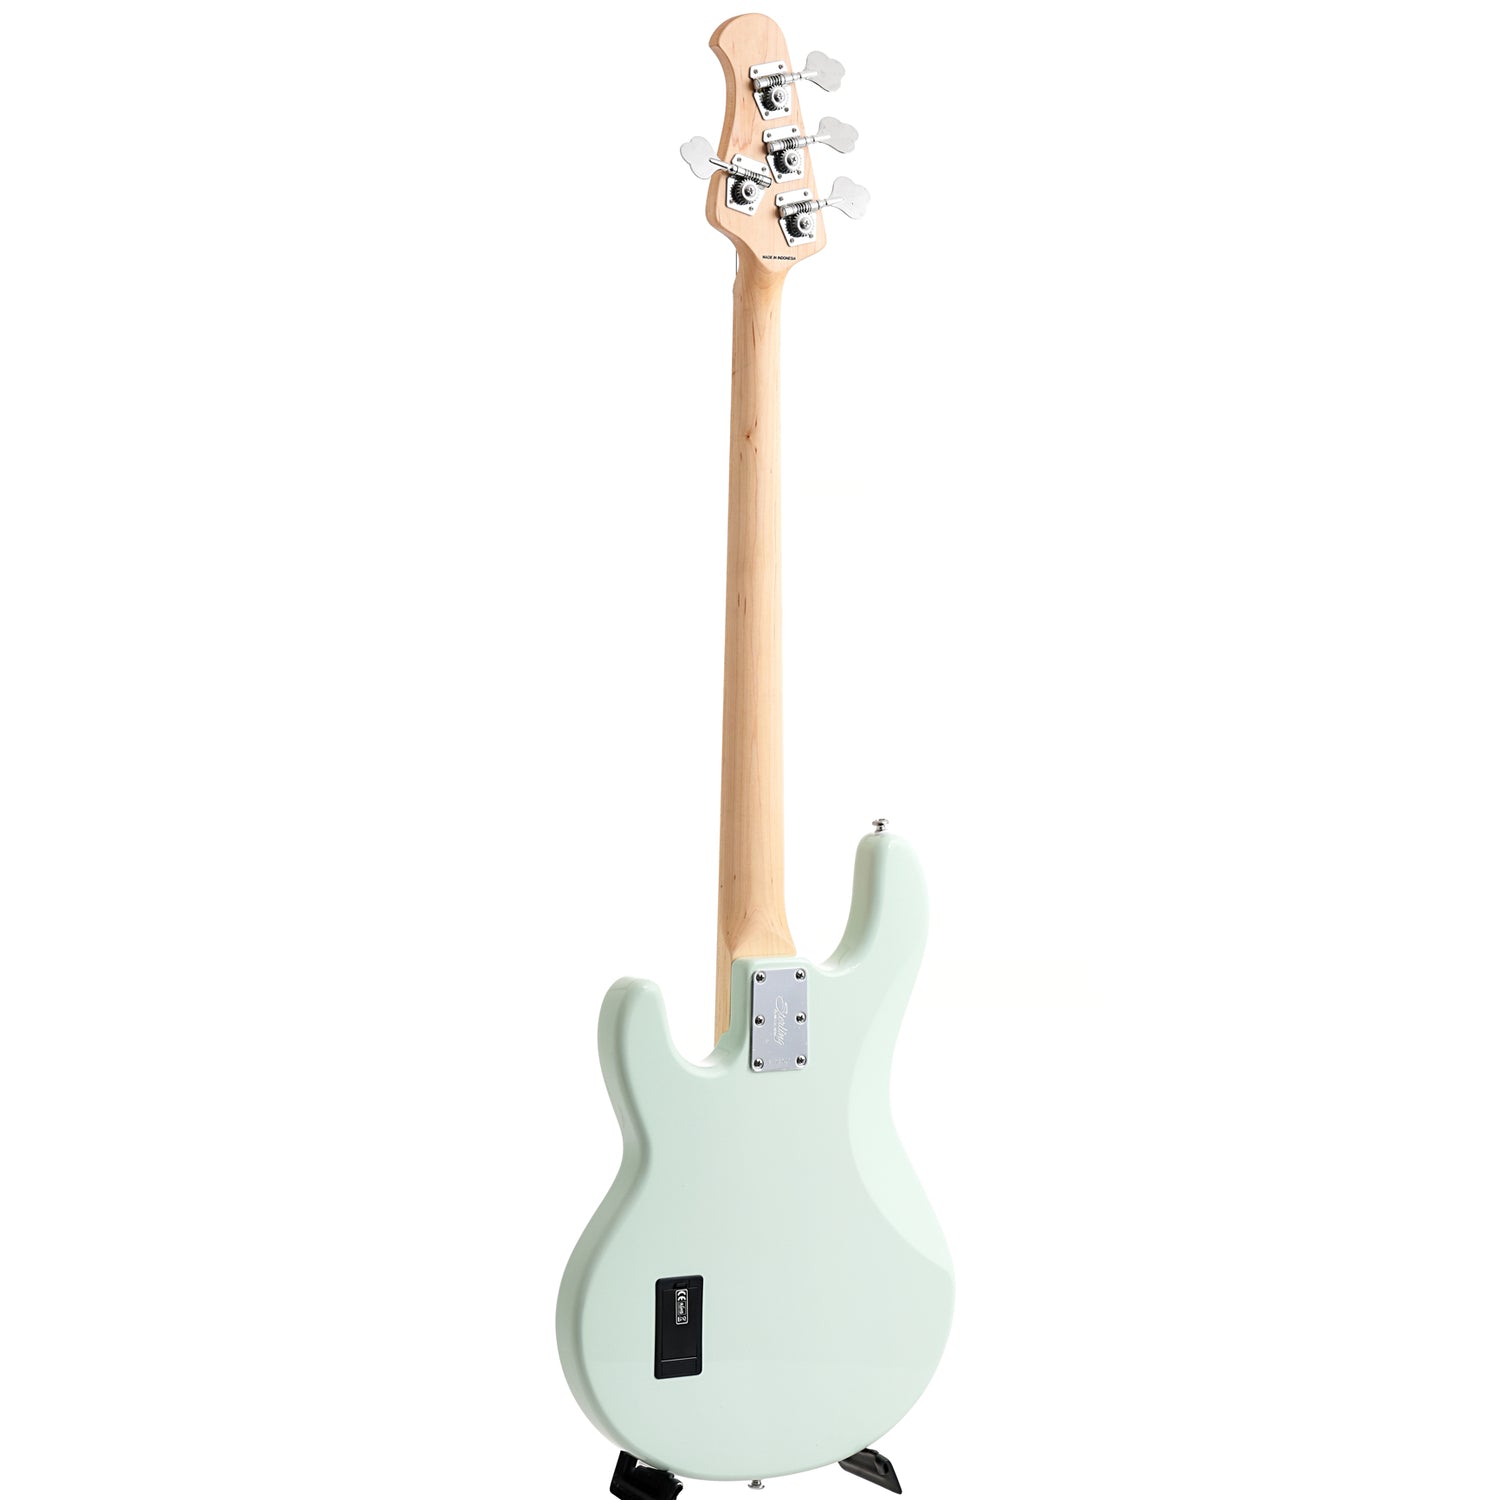 Image 12 of Sterling by Music Man StingRay 4 Bass, Mint Green Finish - SKU# RAY4-MG : Product Type Solid Body Bass Guitars : Elderly Instruments